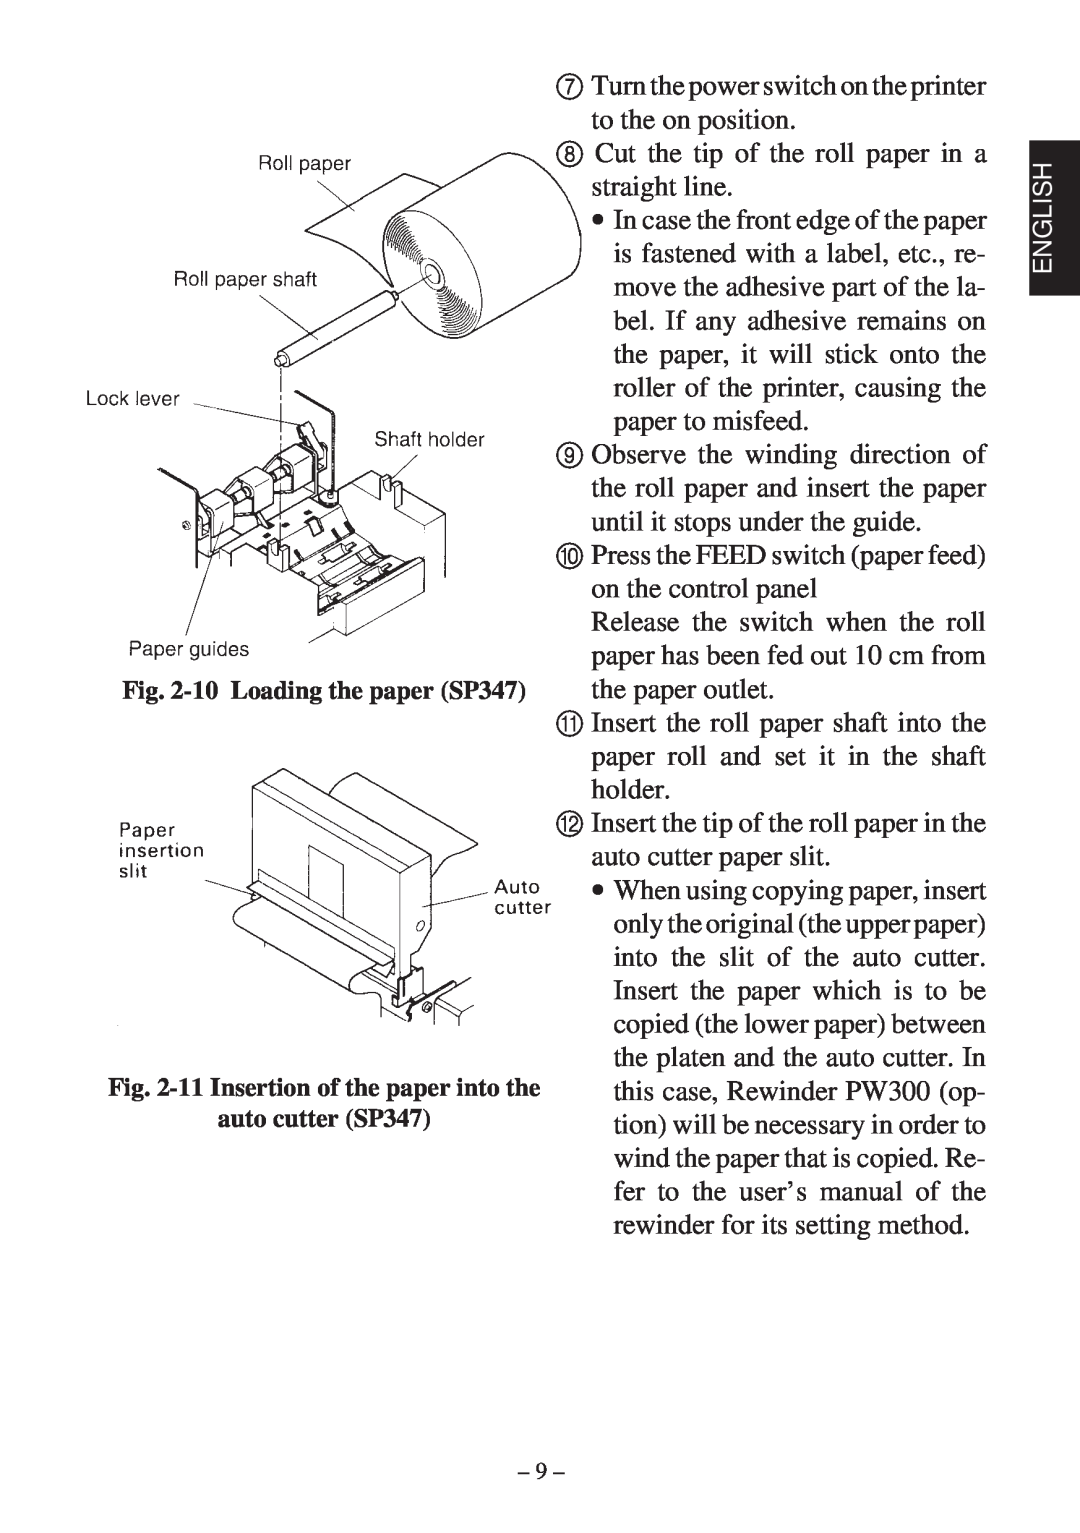 Star Micronics 347F user manual Turn the power switch on the printer to the on position 